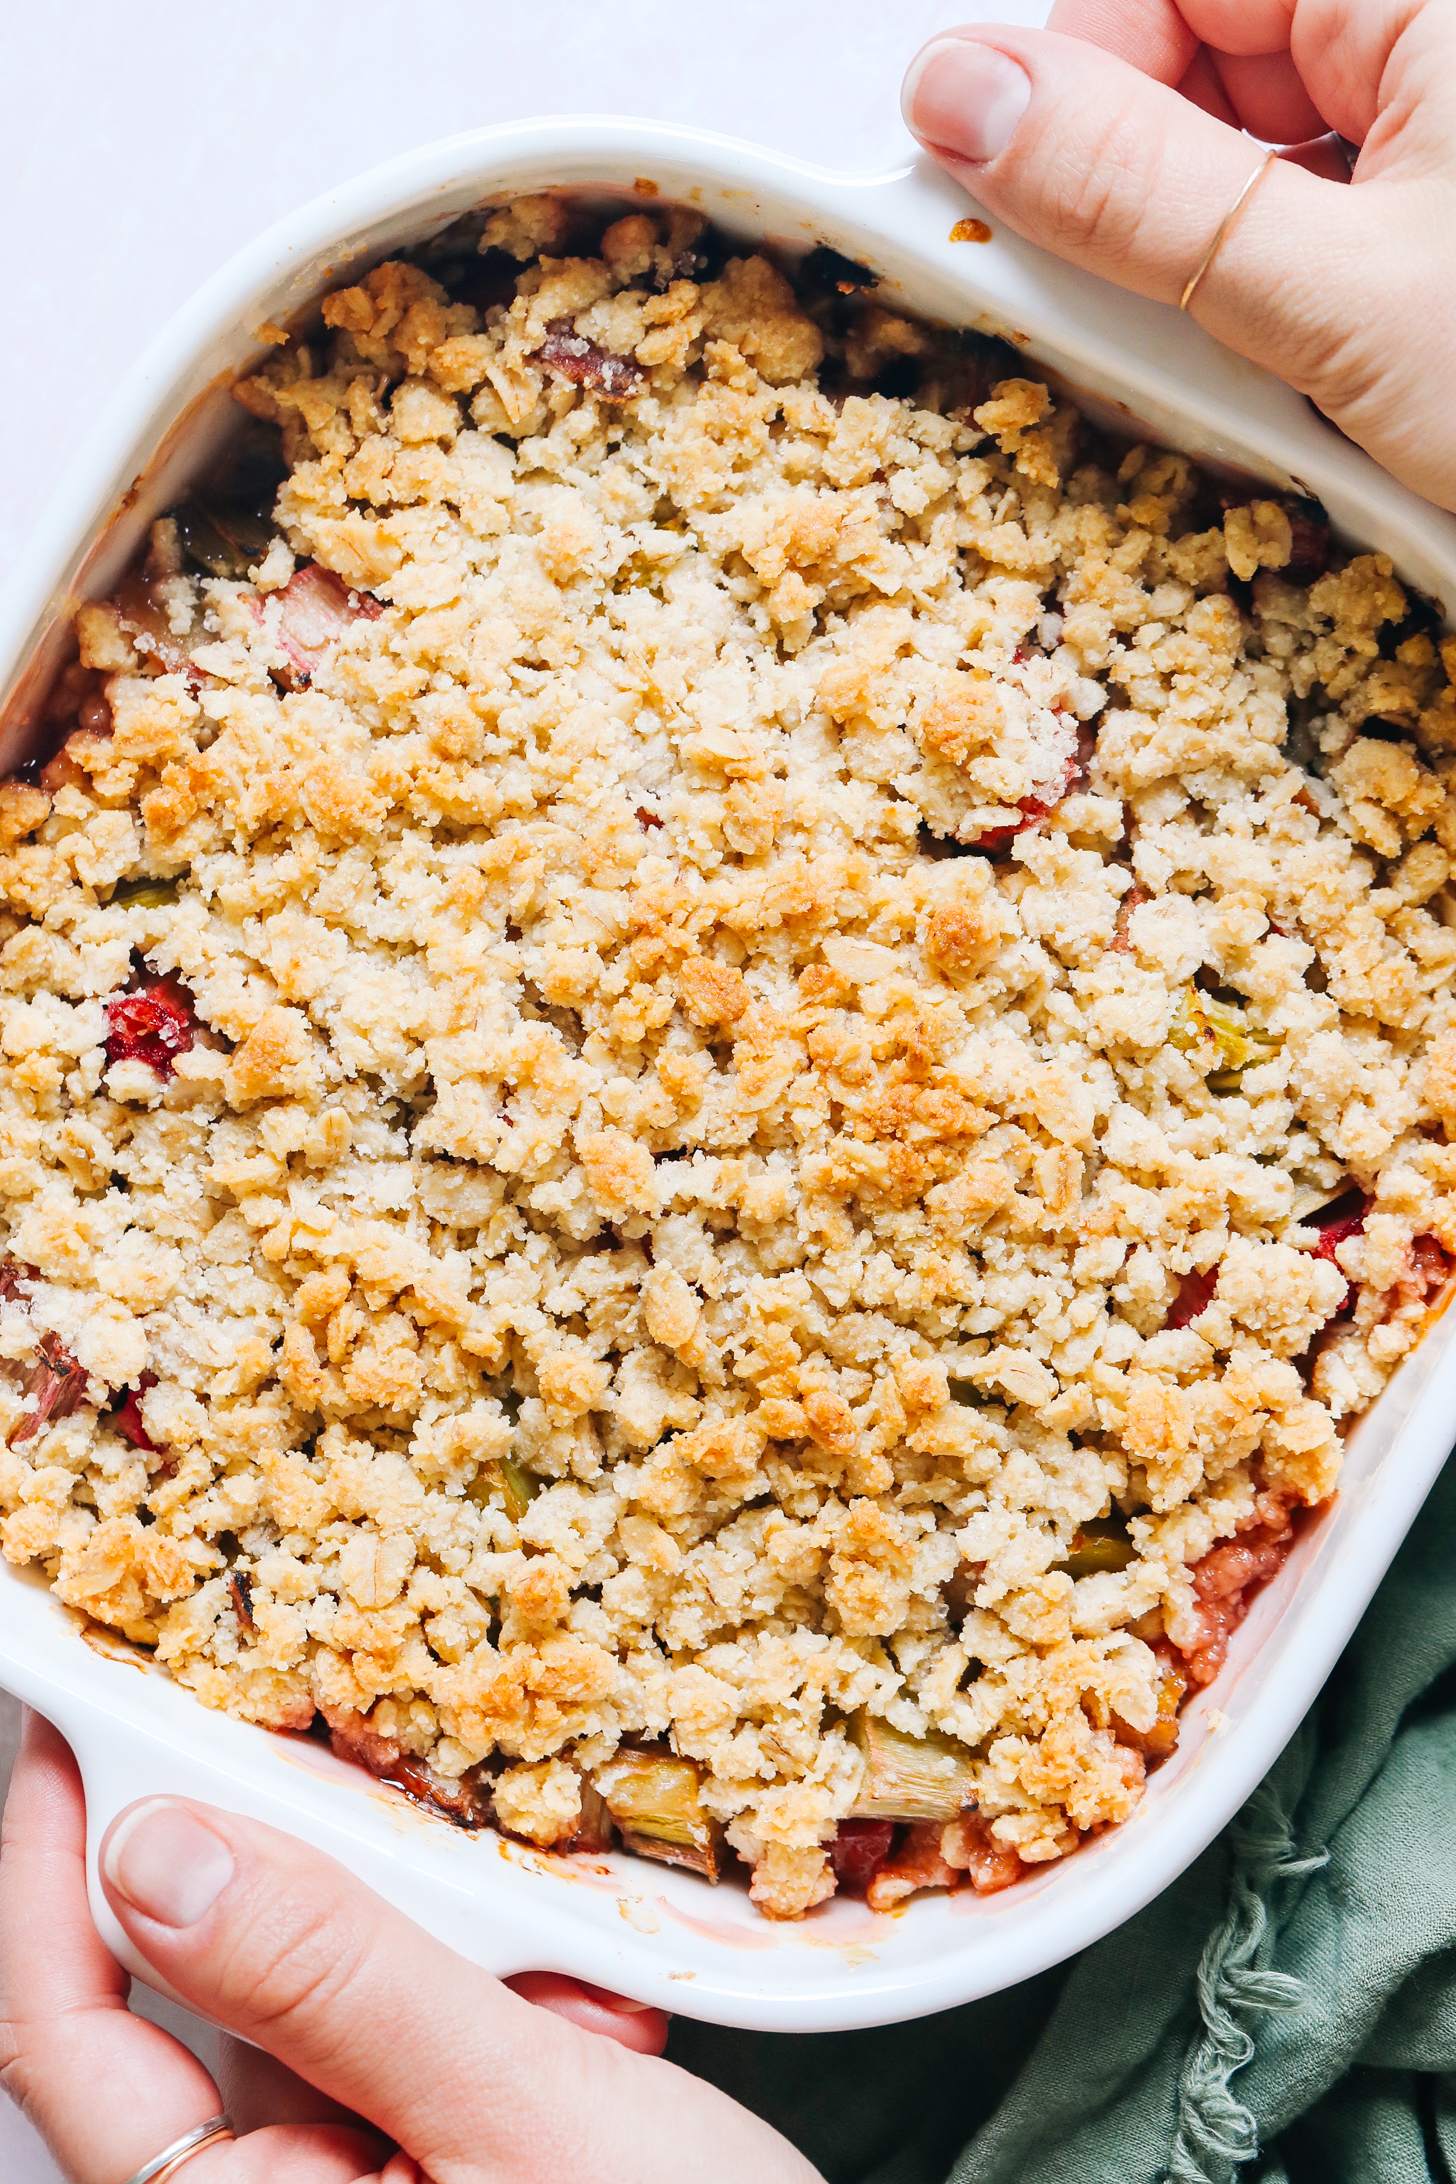 Hands holding the sides of a baking dish filled with vegan gluten-free rhubarb crisp